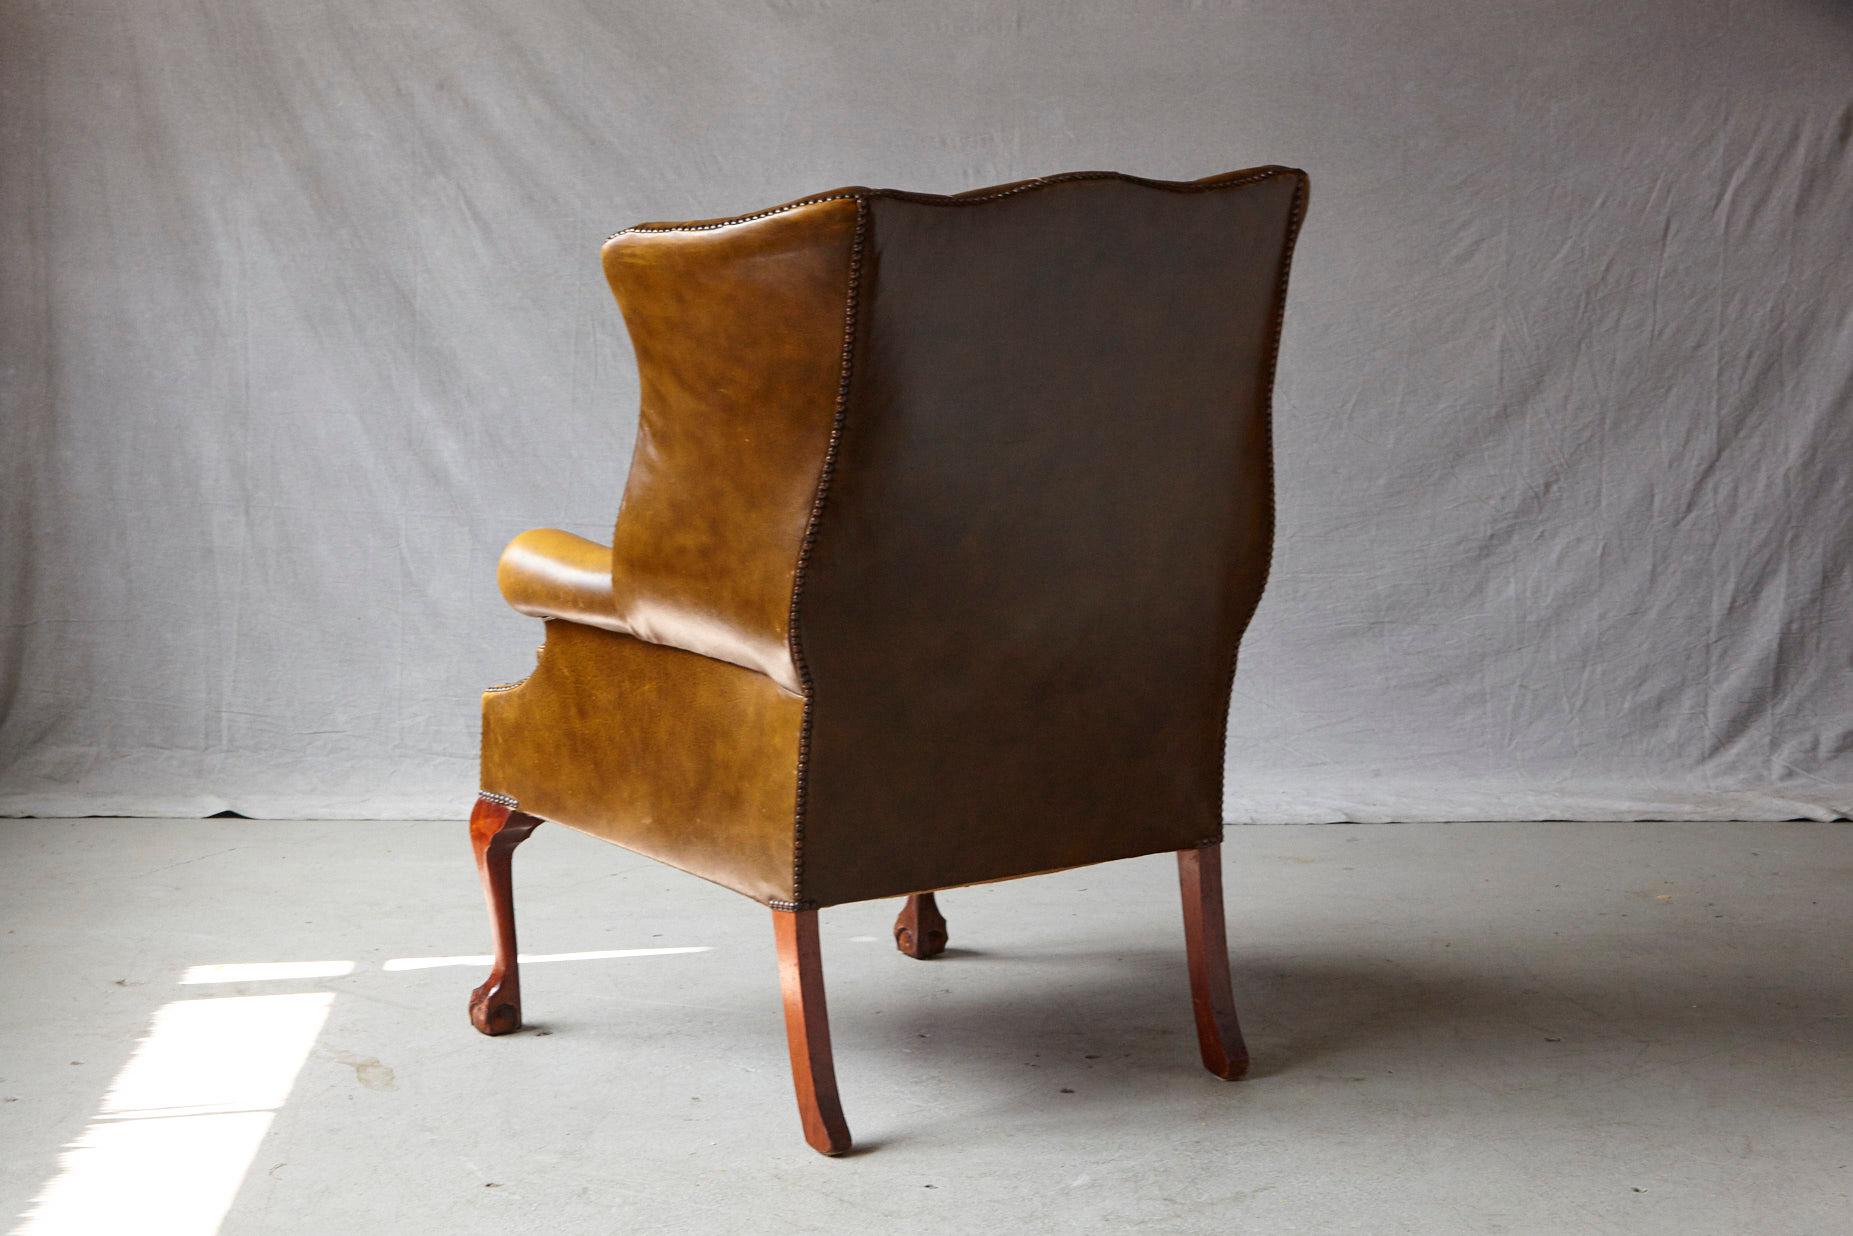 20th Century Buckingham Walnut Burnished Leather Wingback Chair by Hancock & Moore